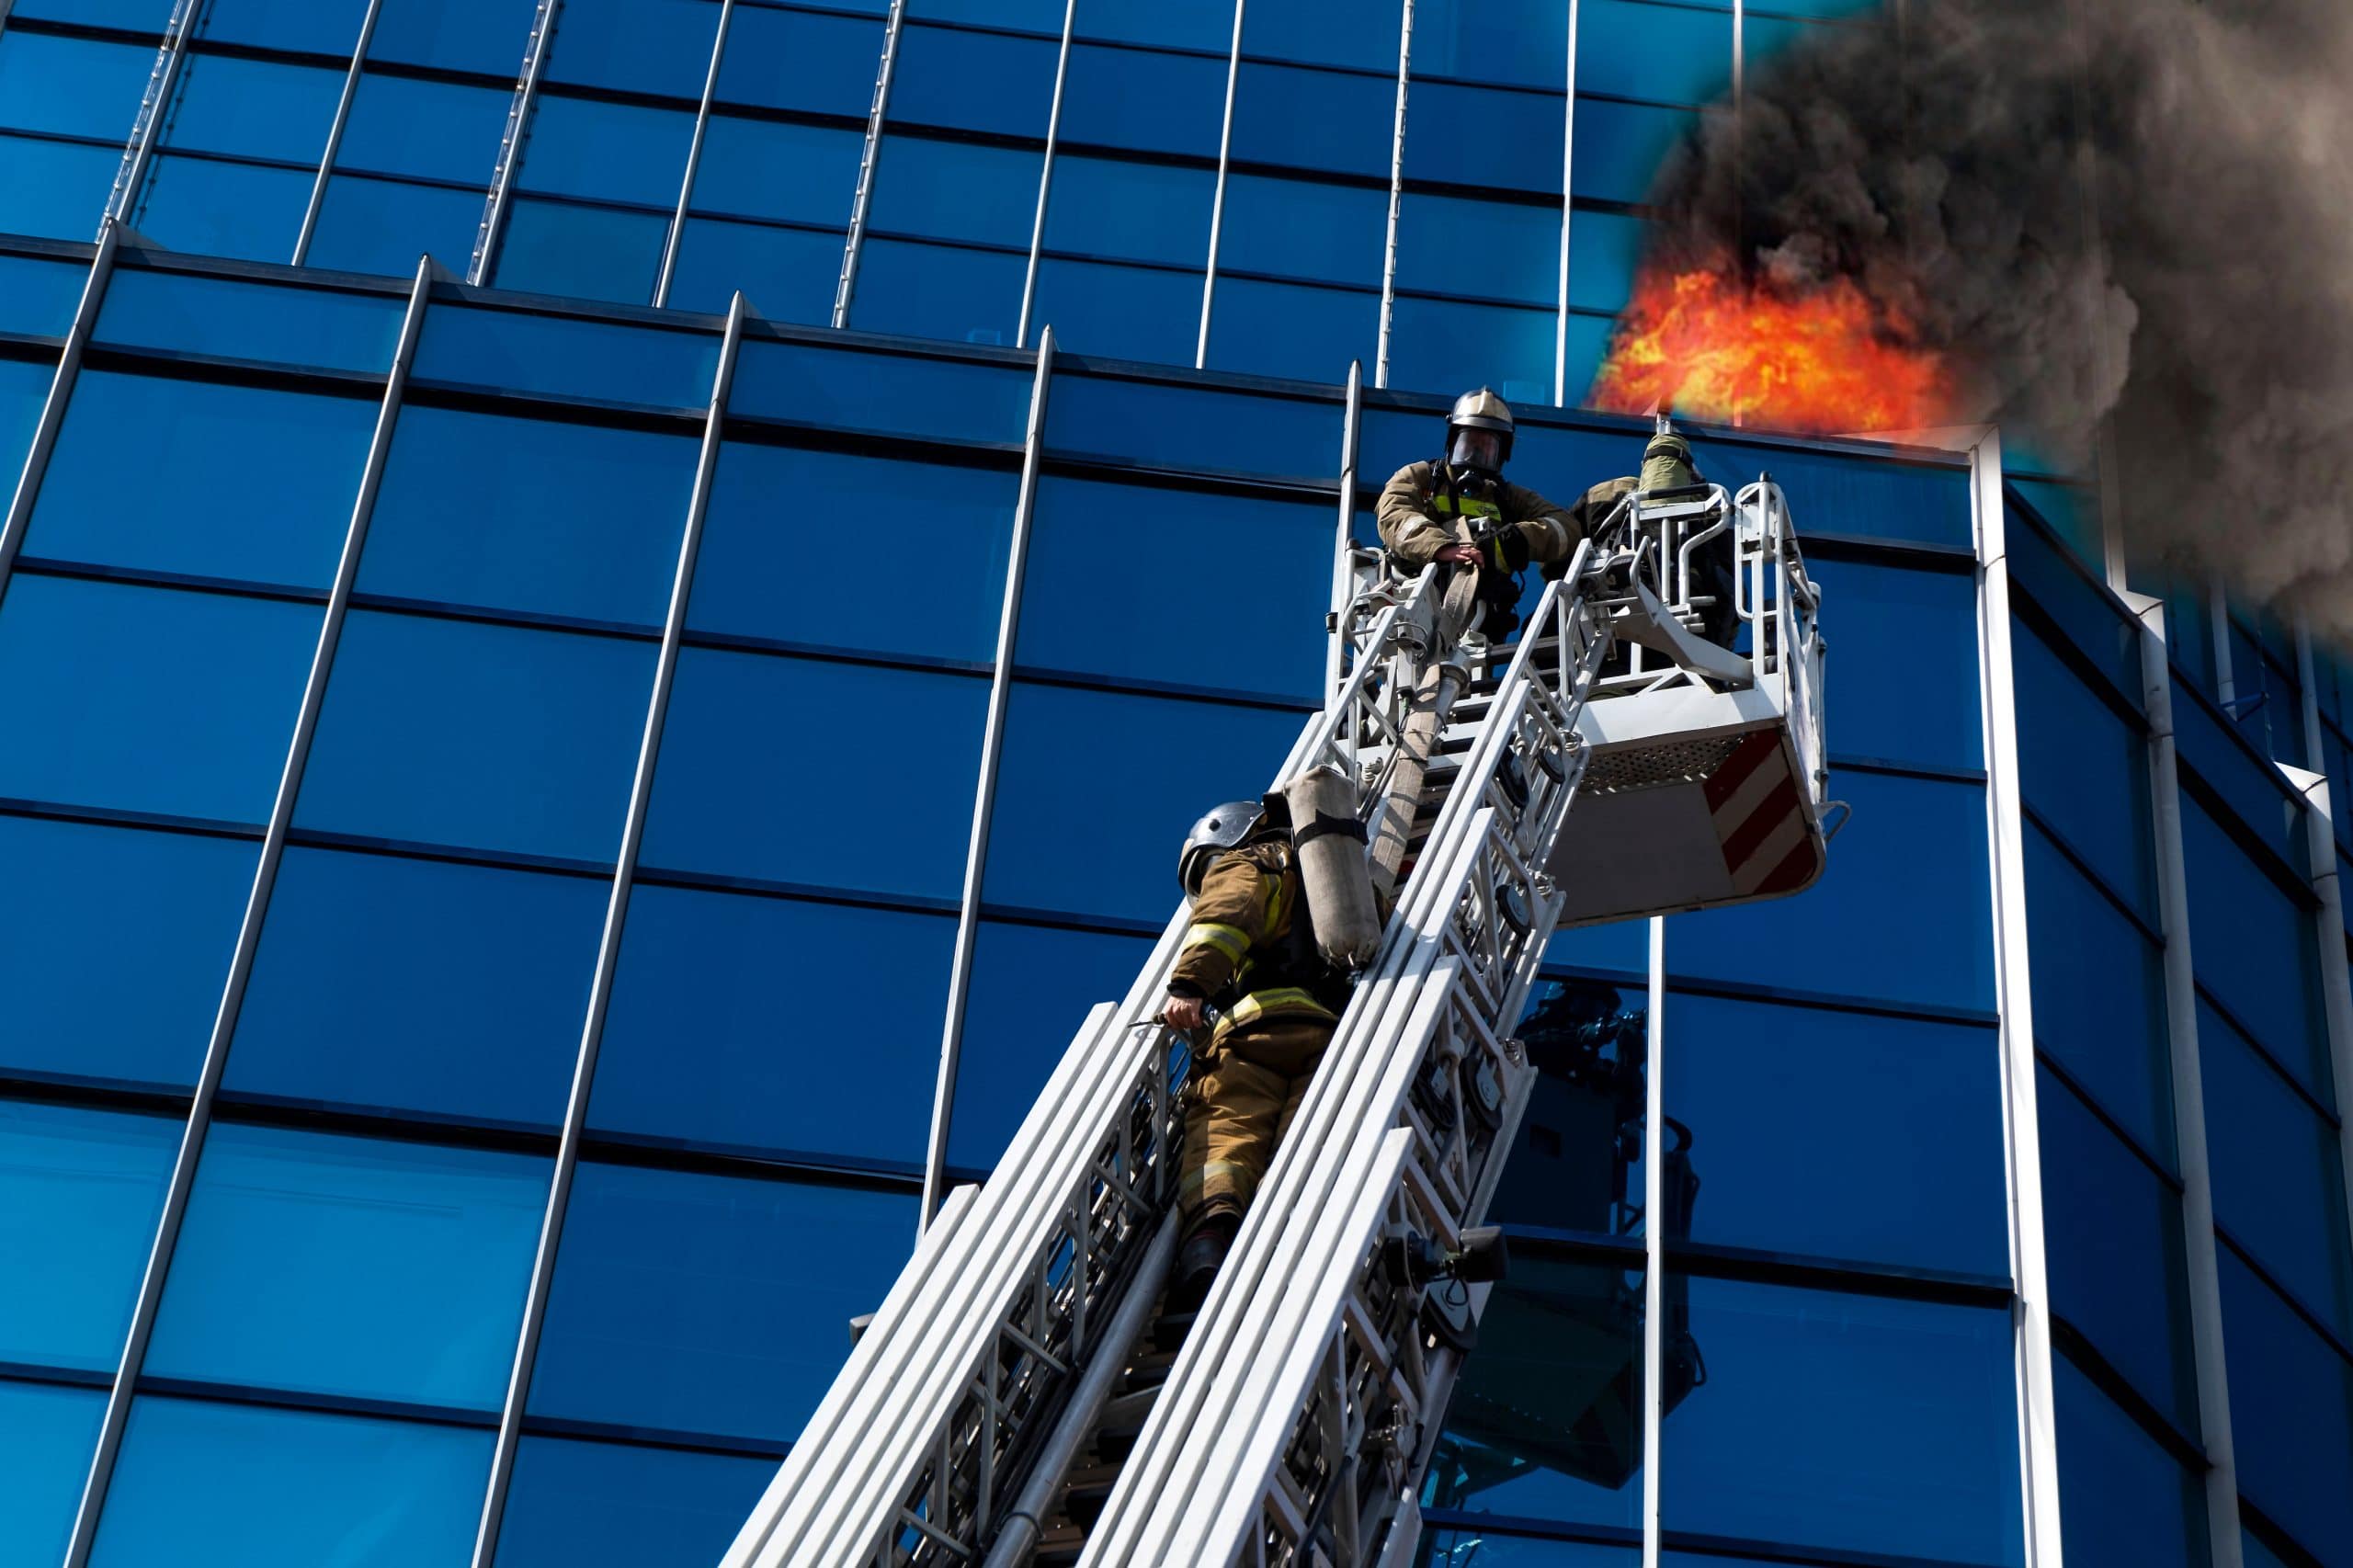 Firemen on ladder in front of tall building on fire.